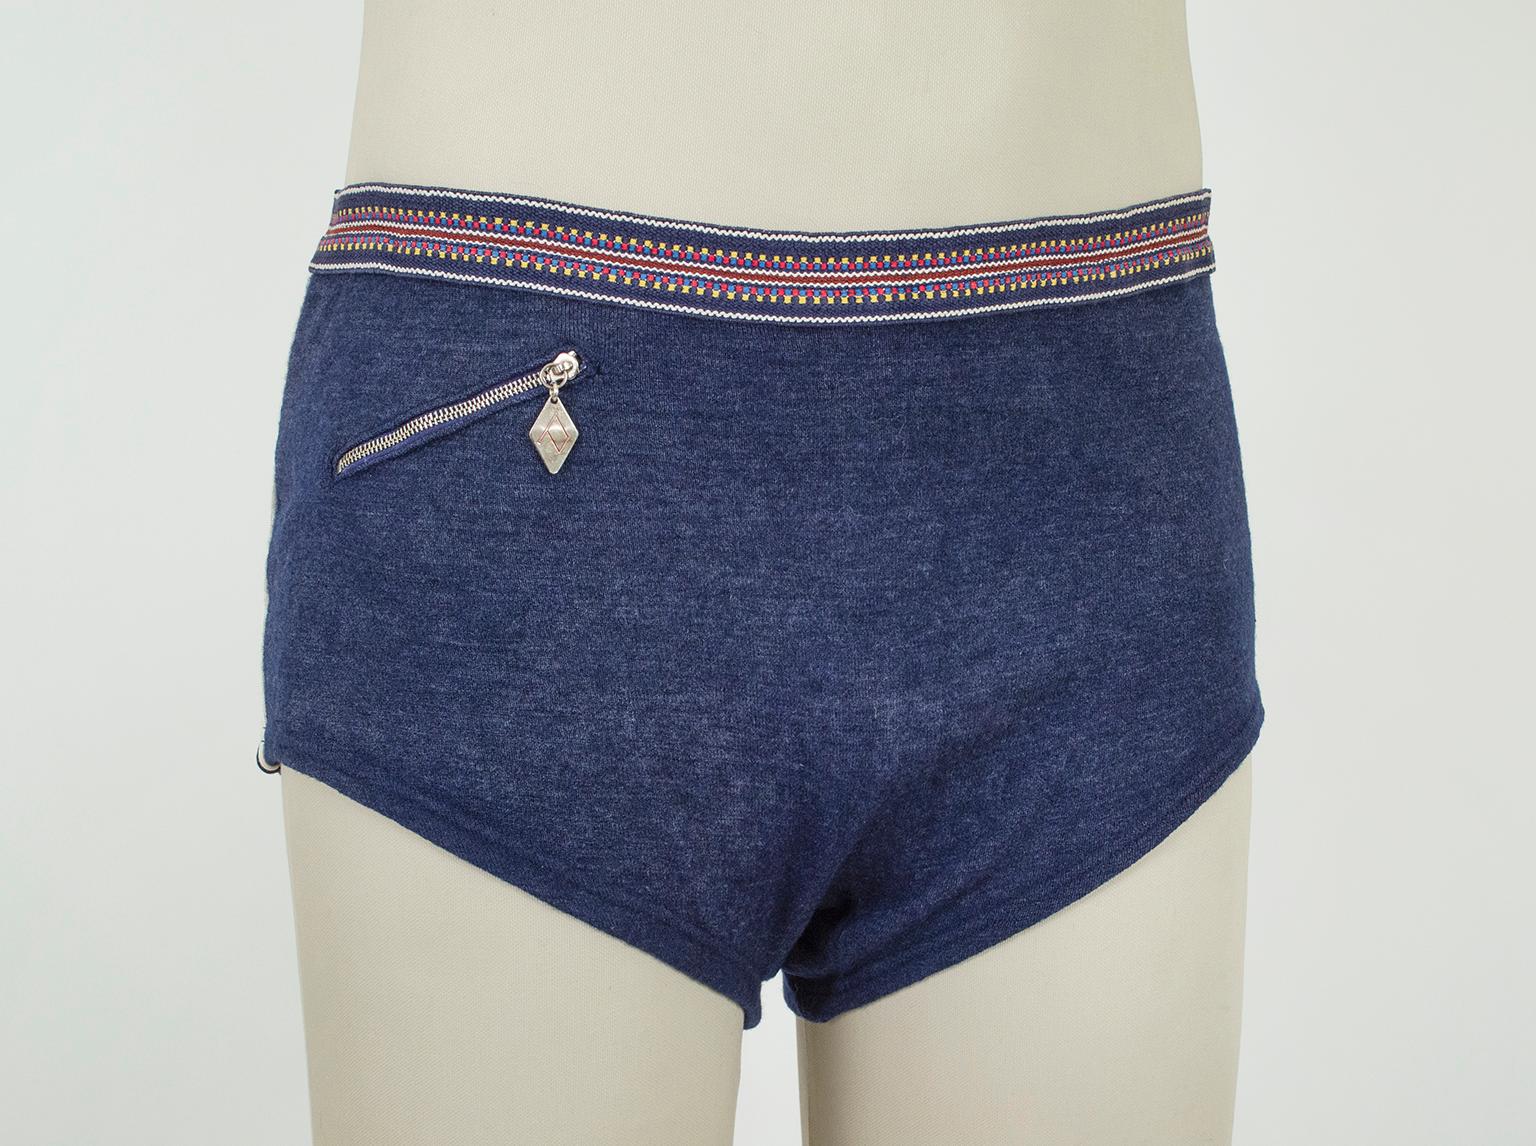 Ultra-rare, these 1930s men’s swim trunks were made by Porolastic, the German brand favored by Olympic record holders thanks to their sleek design. They enraged competitors for their brevity and immodesty when wet, though their success in the water